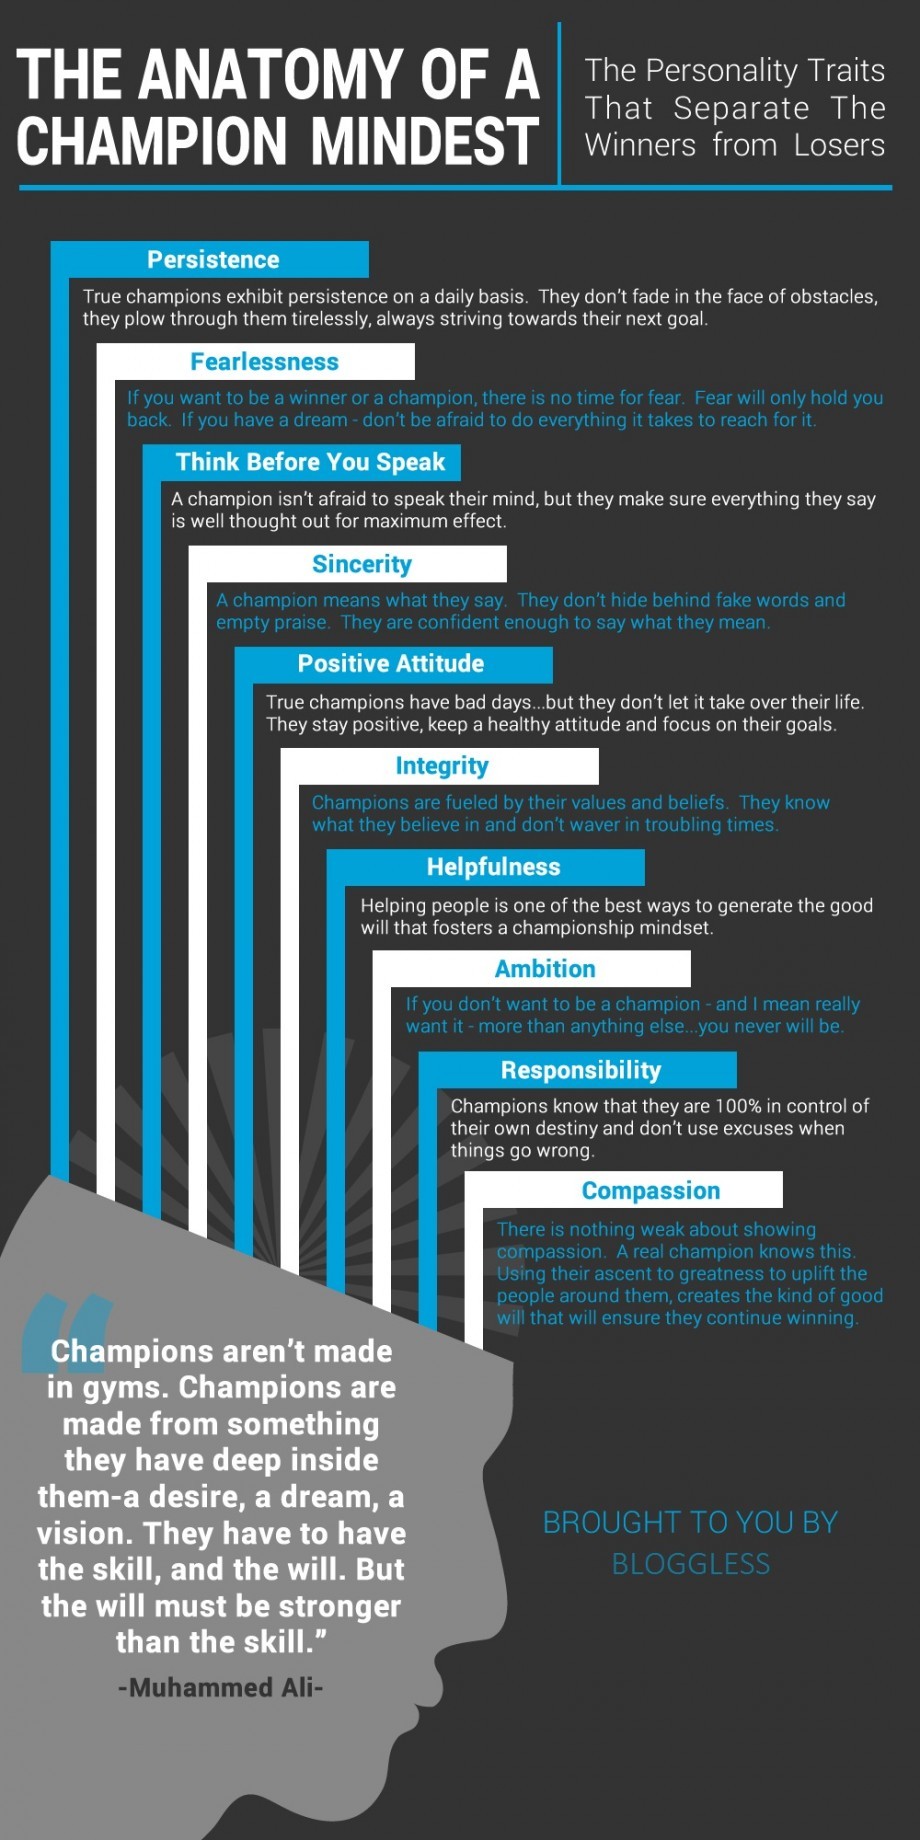 Click on image to see full size version of the Anatomy of the Champion Mindset [image care of Blogless.com]